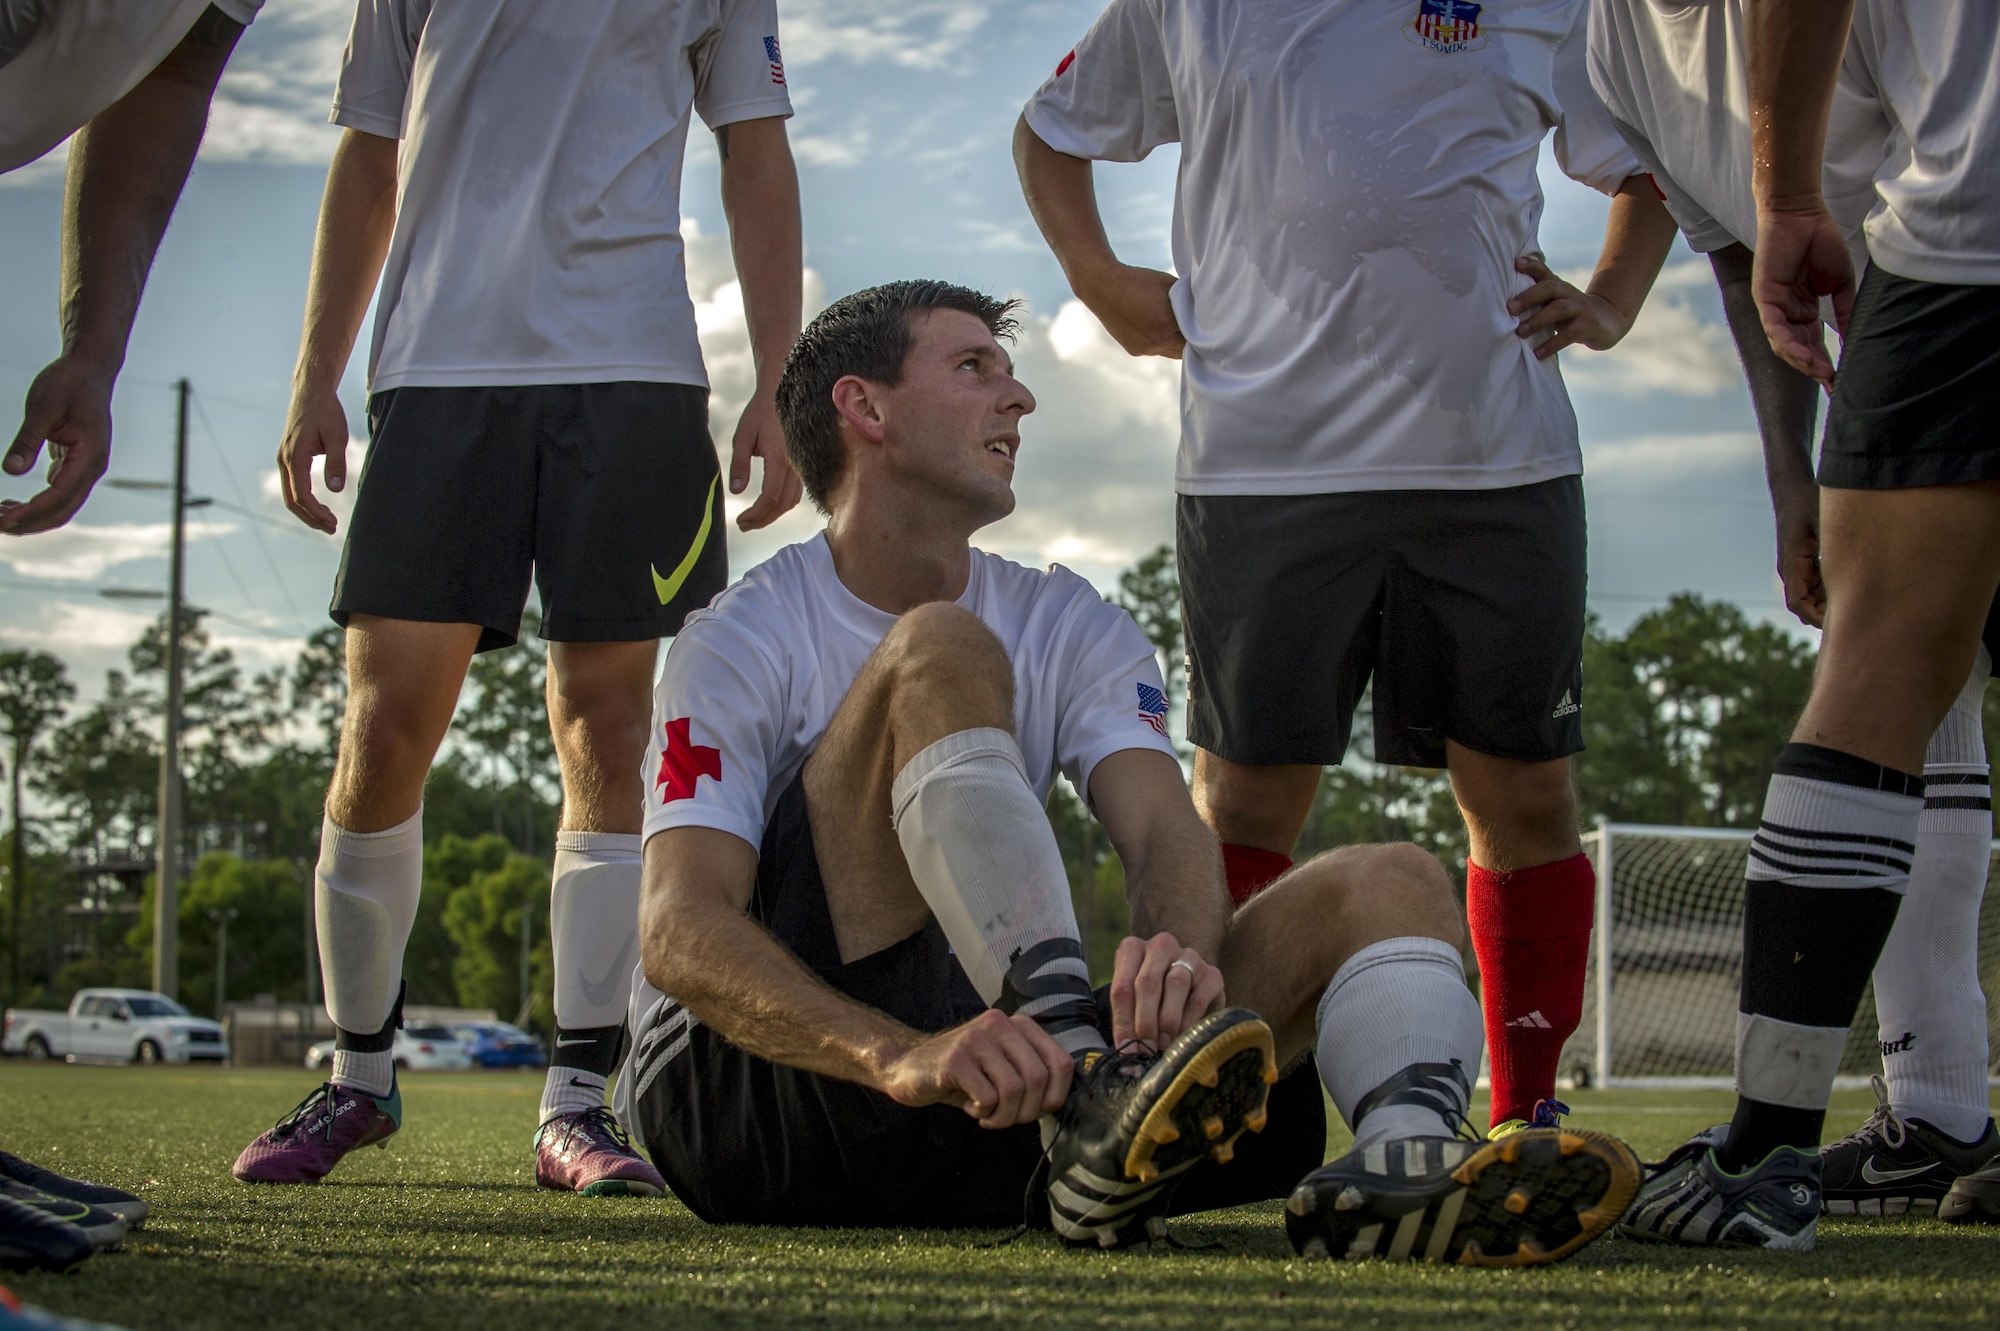 Alex Witmer, a member of the 1st Special Operations Medical Group intramural soccer team, speaks to his teammates at half time during the 2016 Intramural Soccer Championship game against the 319th Special Operations Squadron at Hurlburt Field, Fla. Sept. 13, 2016. The 1st SOMDG defeated the 319th SOS in a double-elimination match with a final score of 2-0. (U.S. Air Force photo by Airman 1st Class Isaac O. Guest IV)
